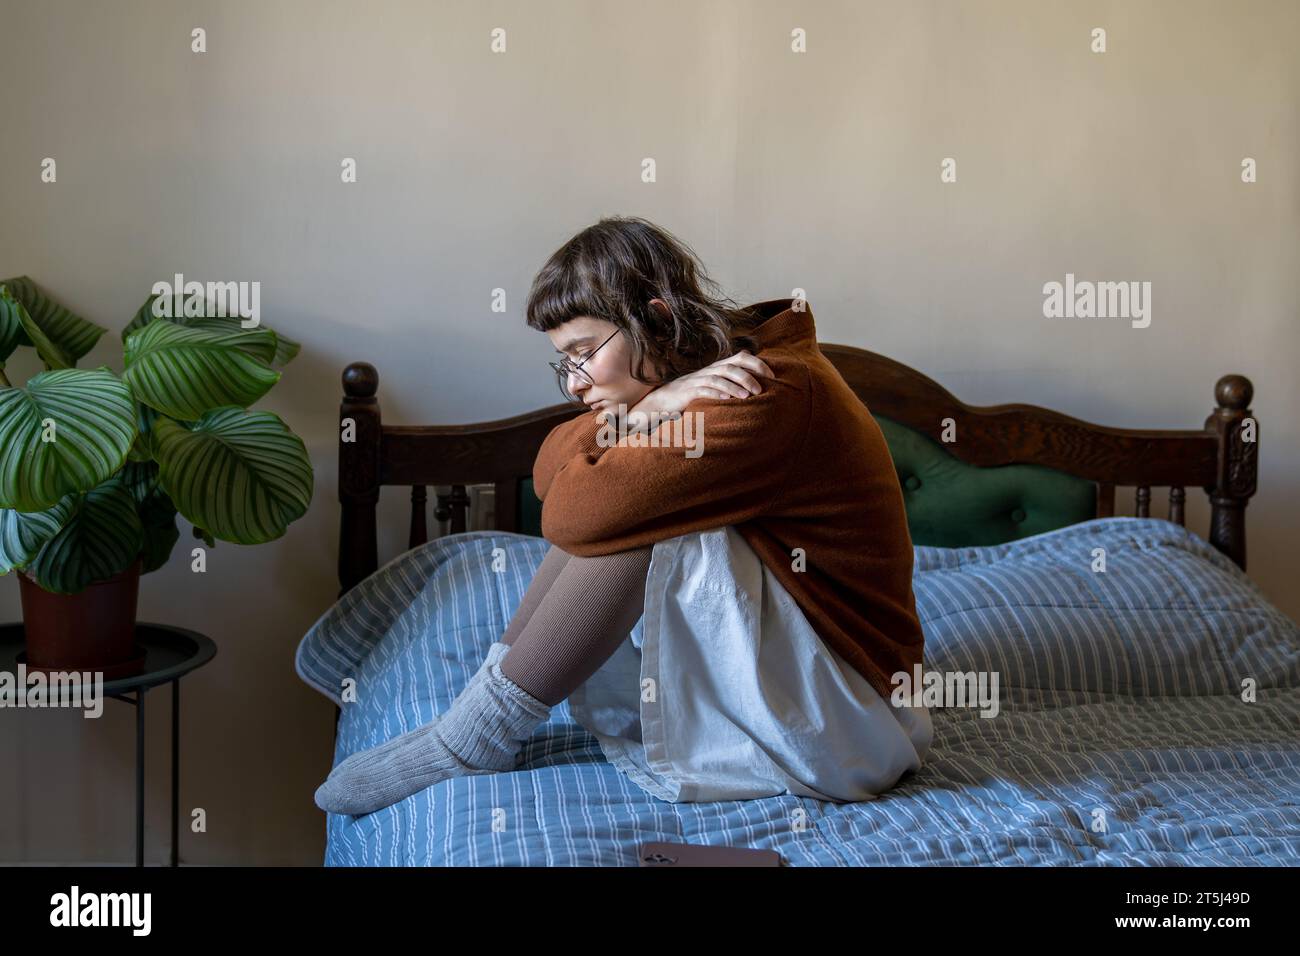 Unhappy depressed teen girl sitting on bed embracing knees in procrastination, apathy and solitude Stock Photo